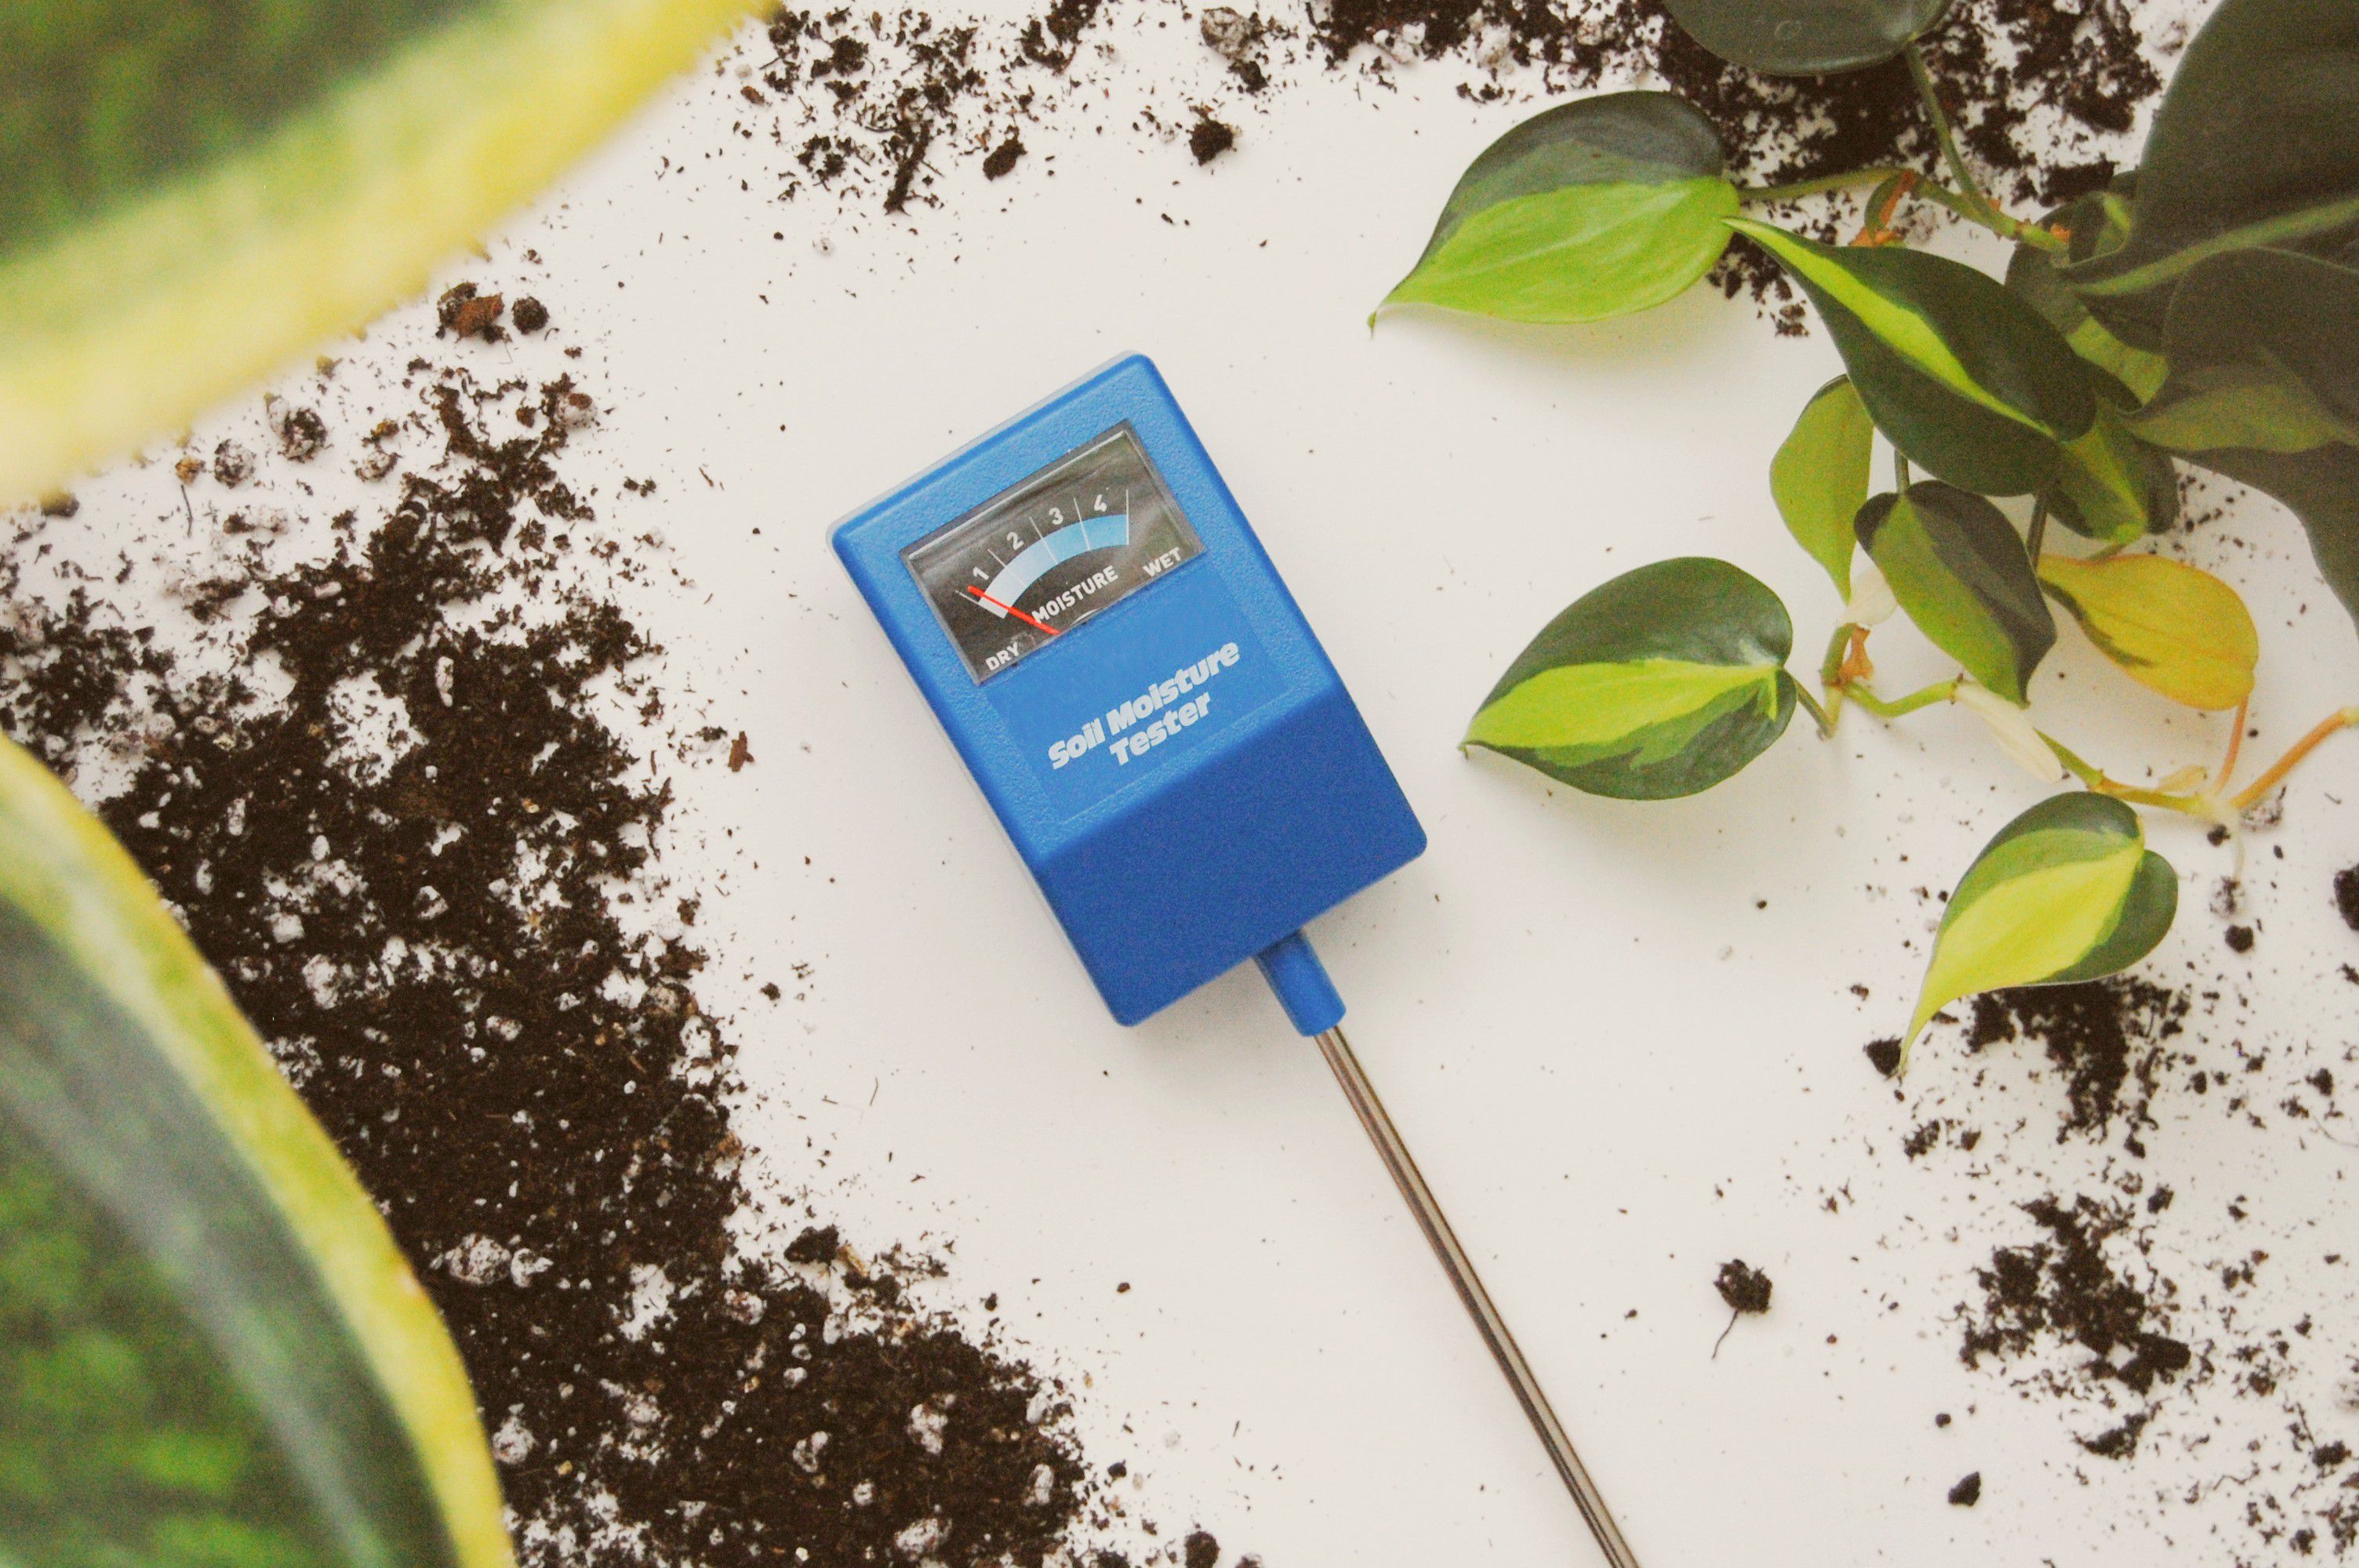 This Device Takes the Guesswork Out of Watering Your Plants